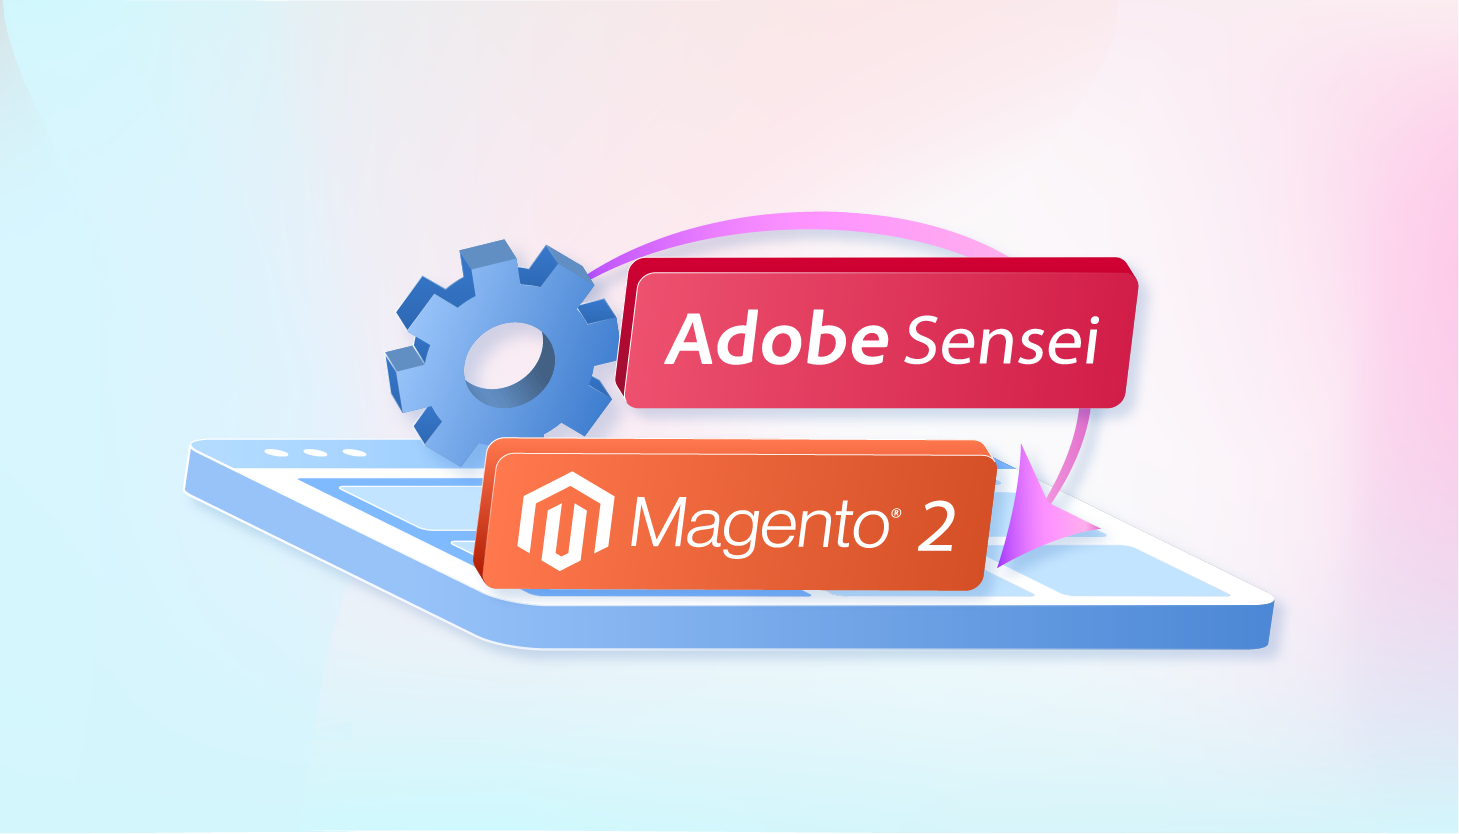 Adobe Sensei Magento 2: Key Features and Challenges